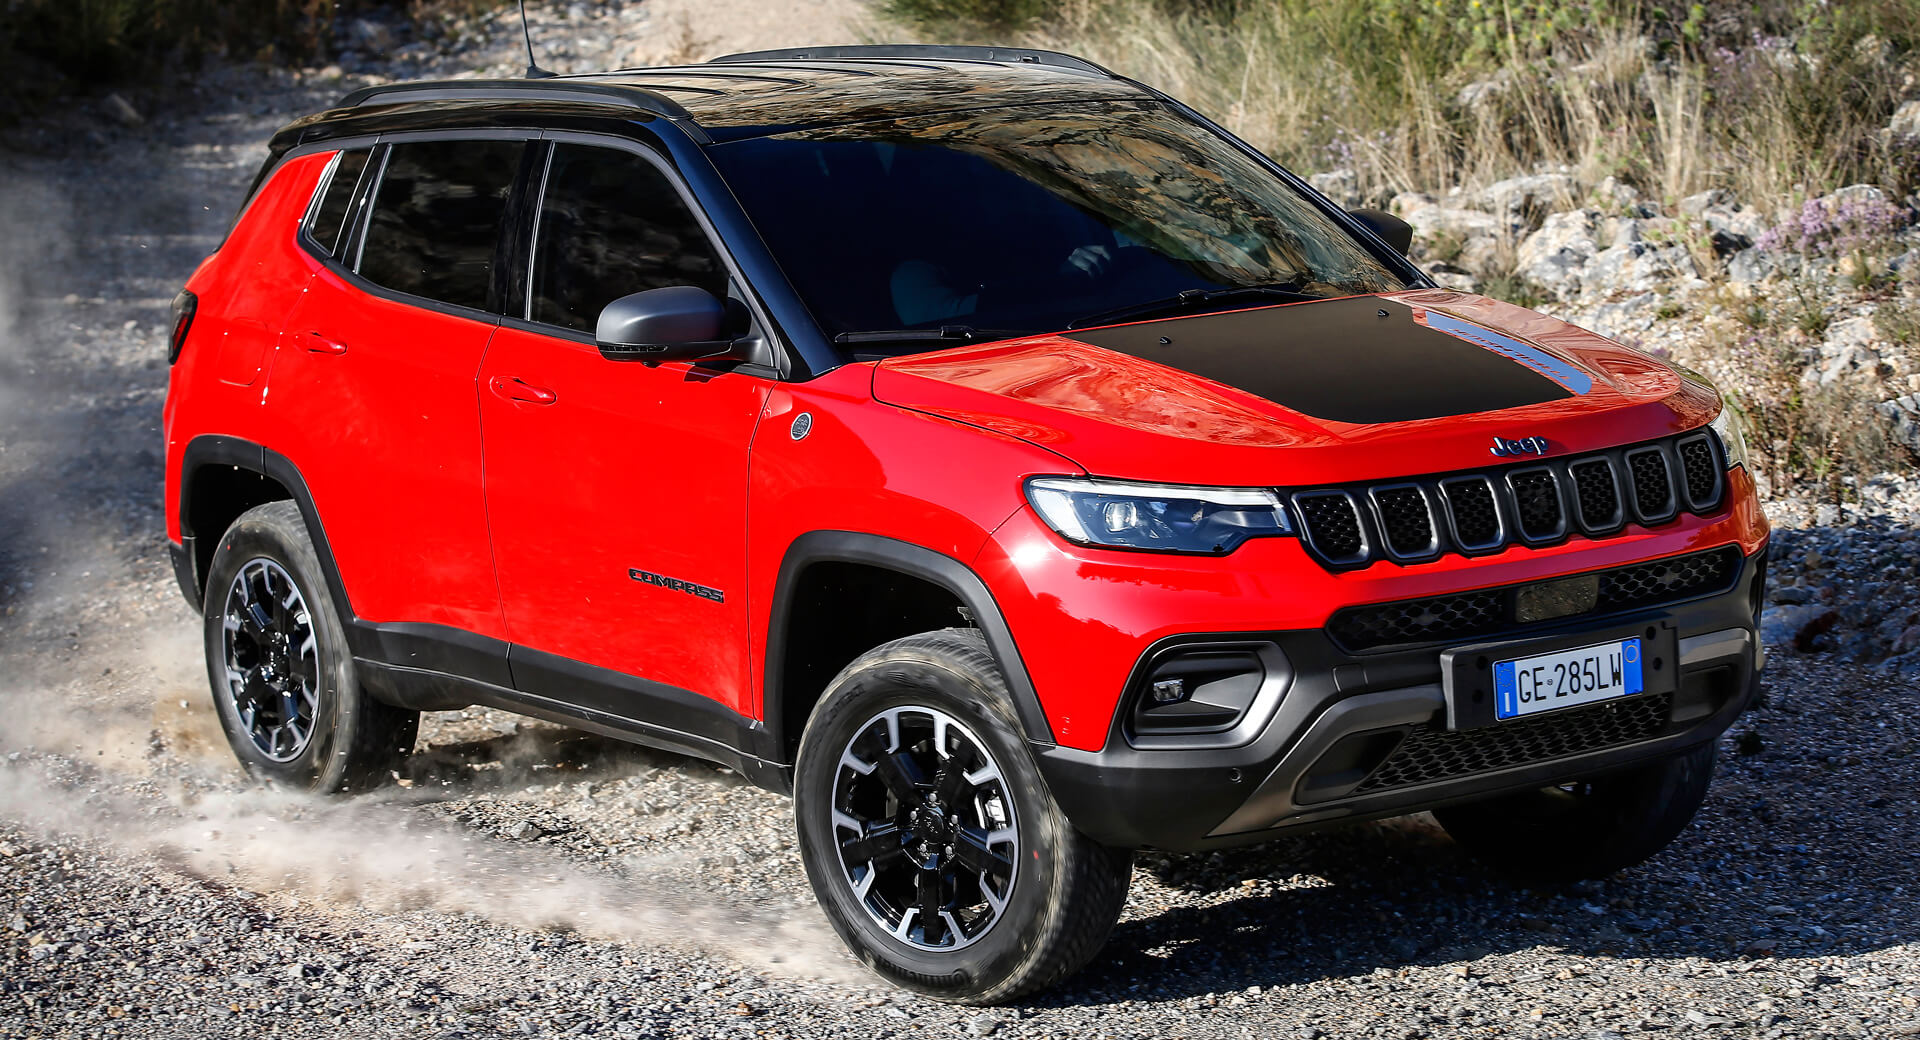 Trim Levels of the 2021 Jeep Compass